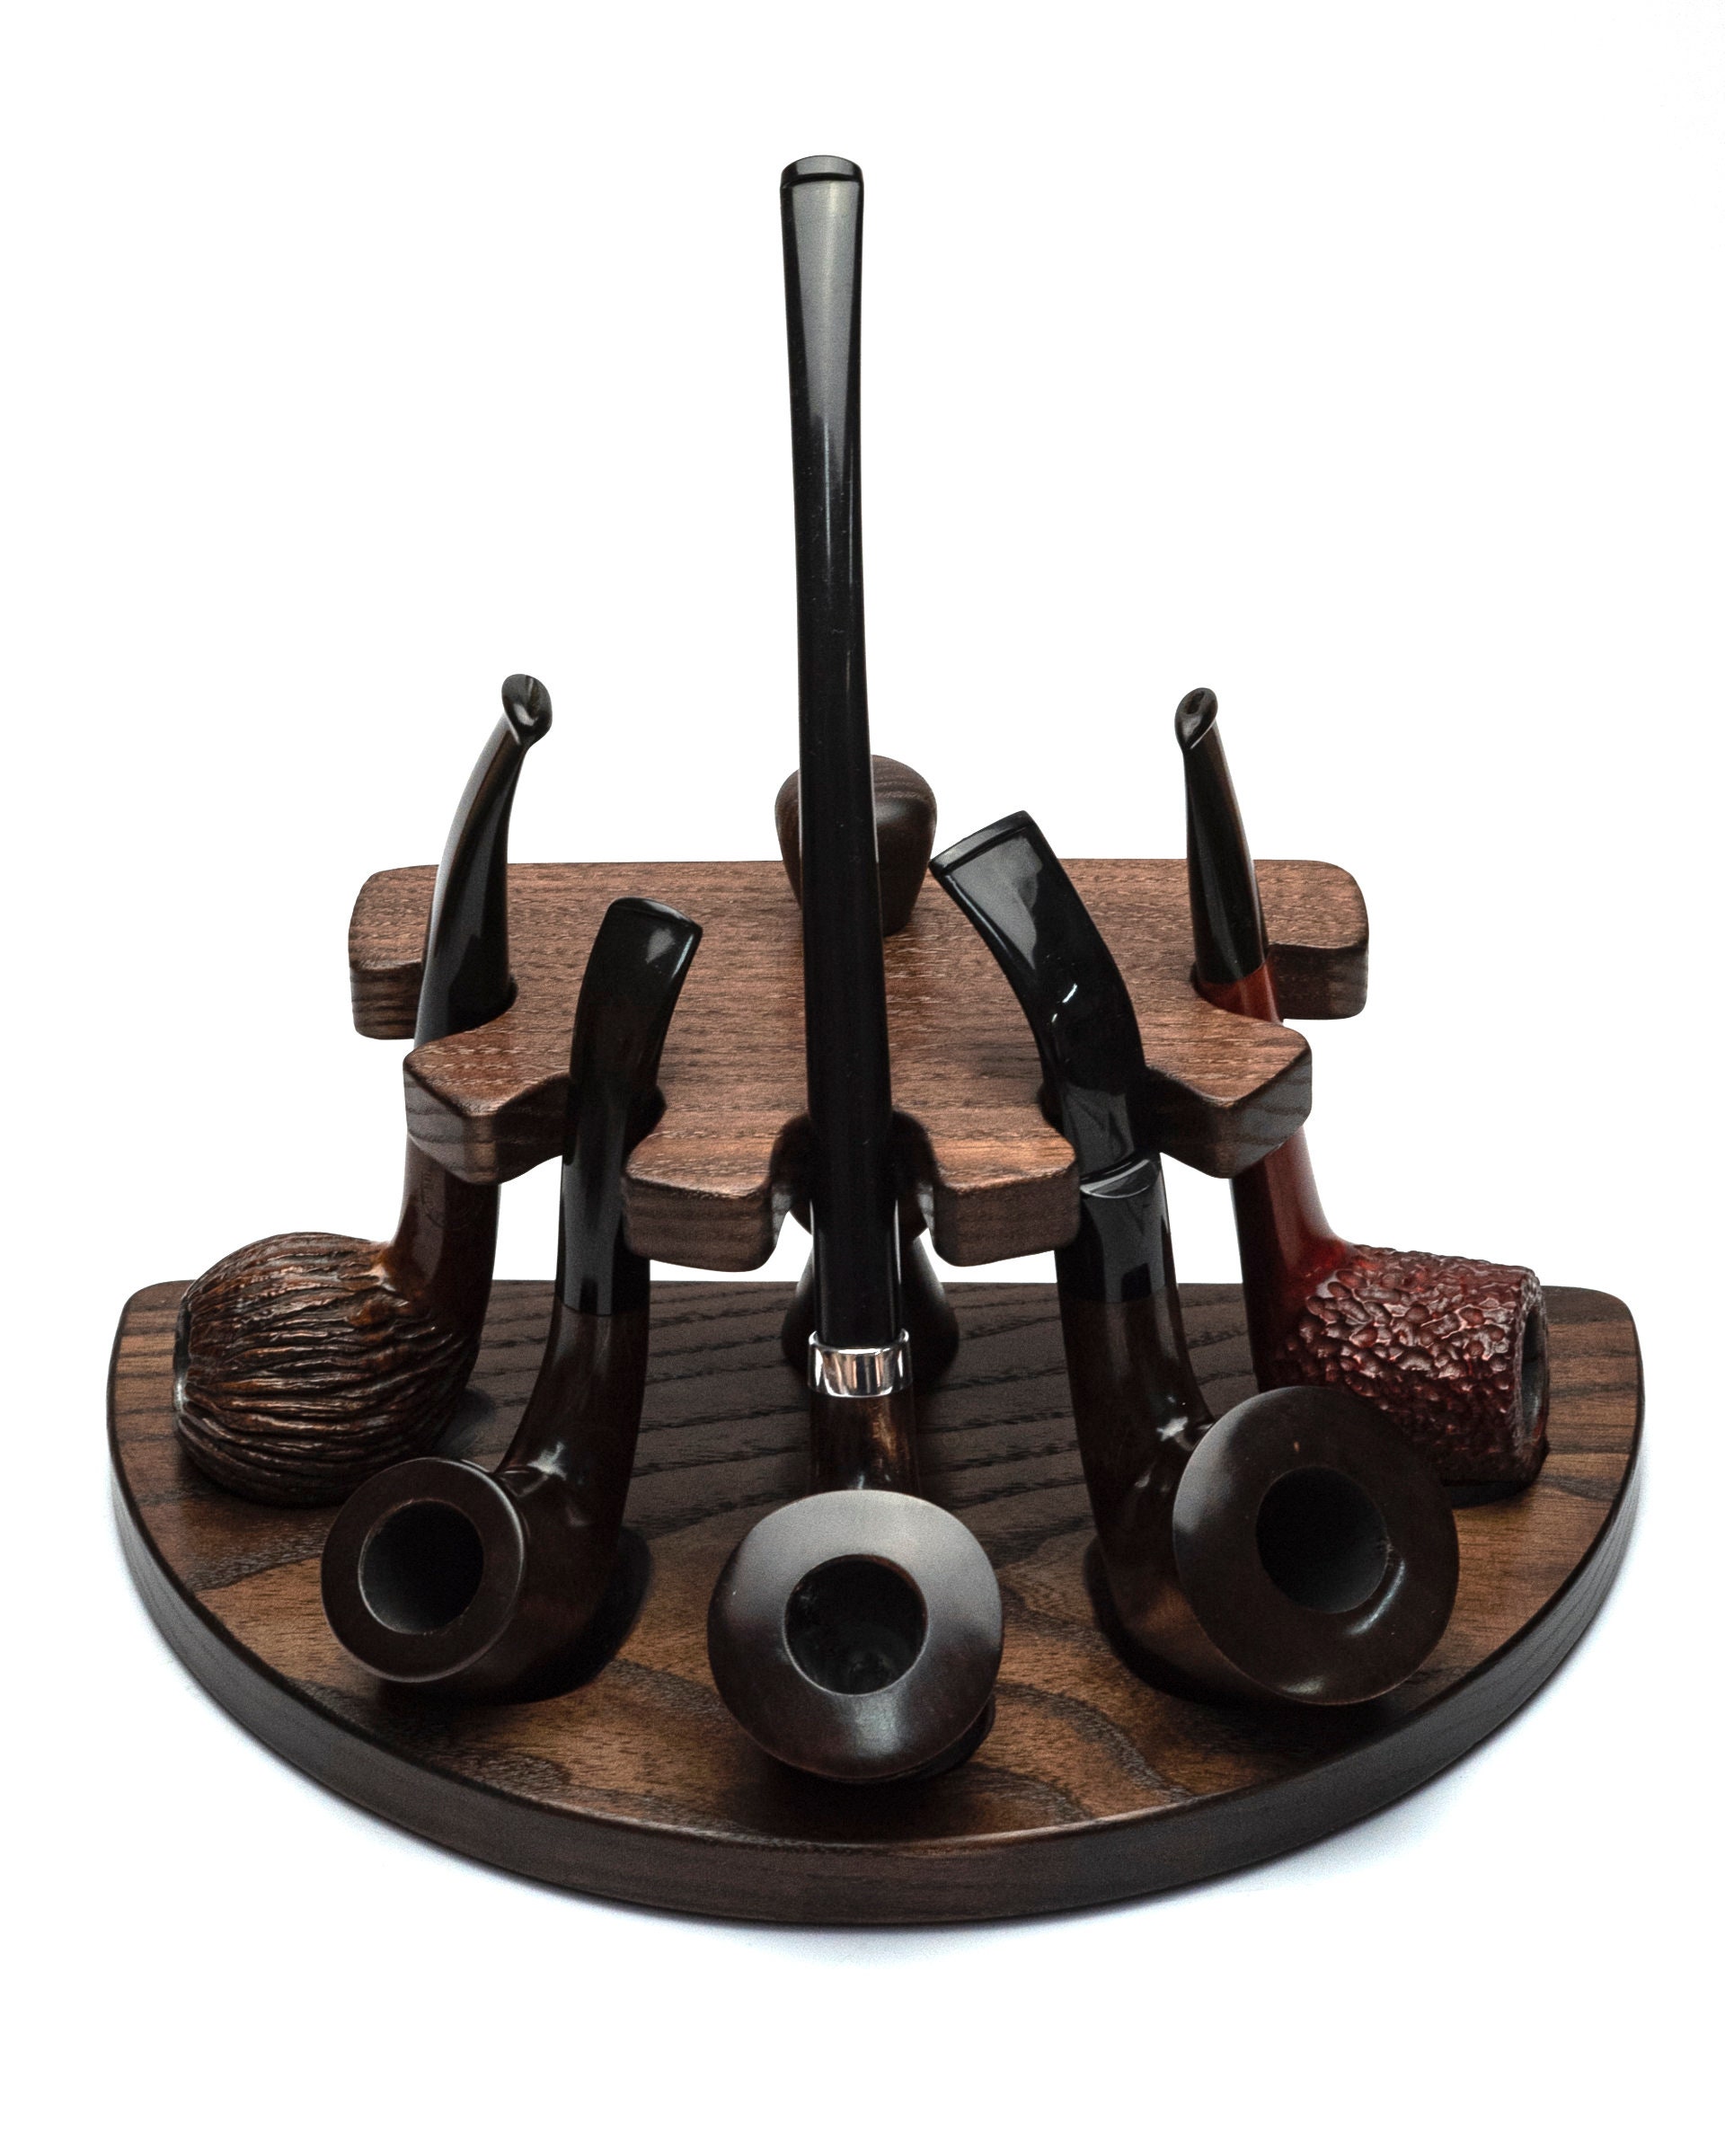 Tobacco Pipe Rack for 5 Smoking Pipes Pipe Stand Holder Made of Solid  Ash-tree Wood 5 Slots Designed With Rubber Rings Pipe Rest Kafpipe 